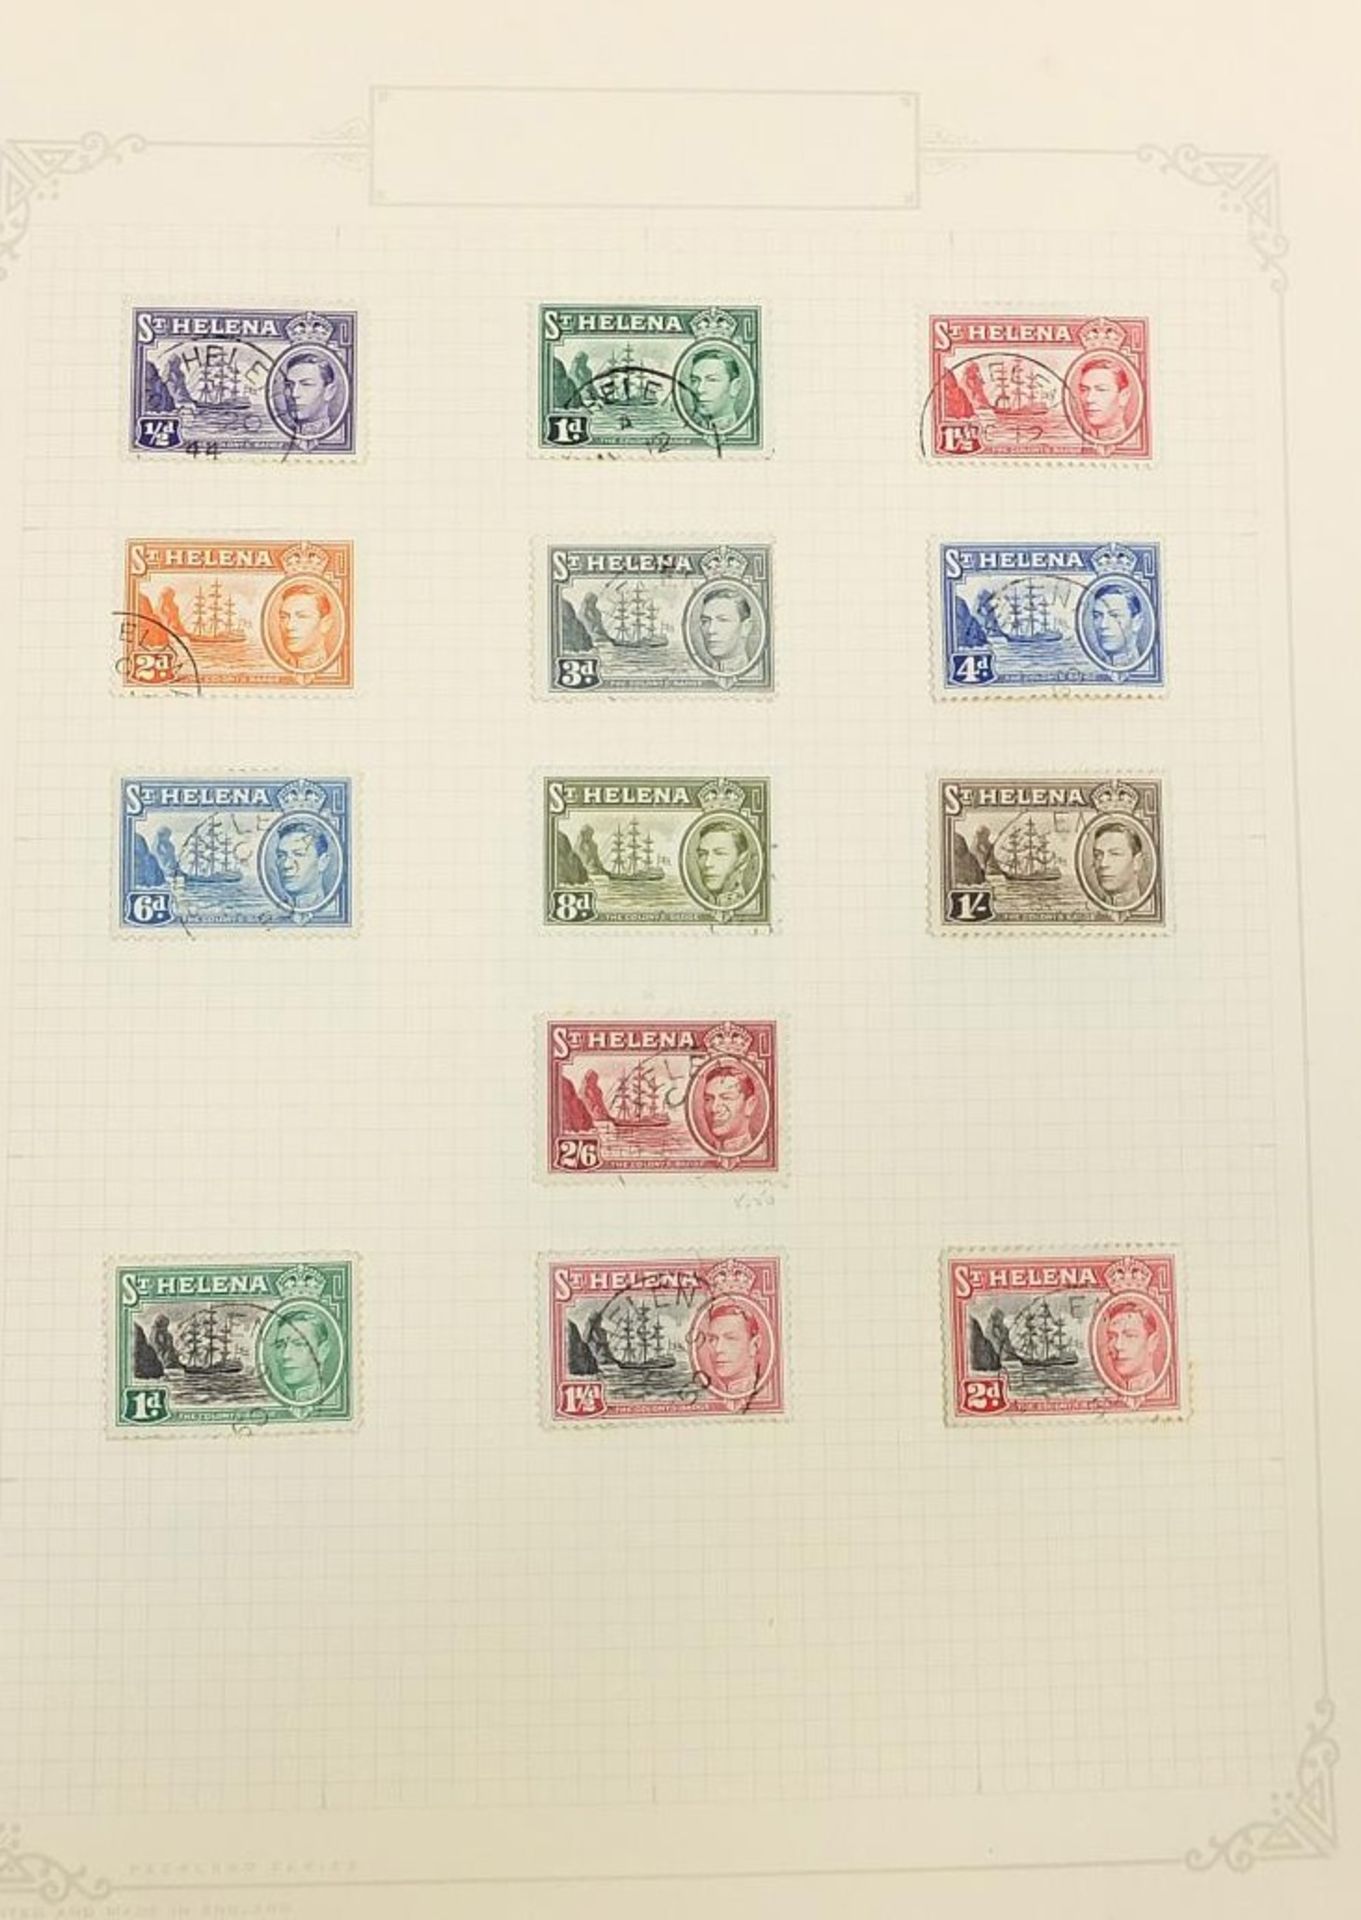 Commonwealth stamps from Saint Helena, Saint Kitts & Nevis and Saint Lucia arranged on several pages - Image 2 of 7